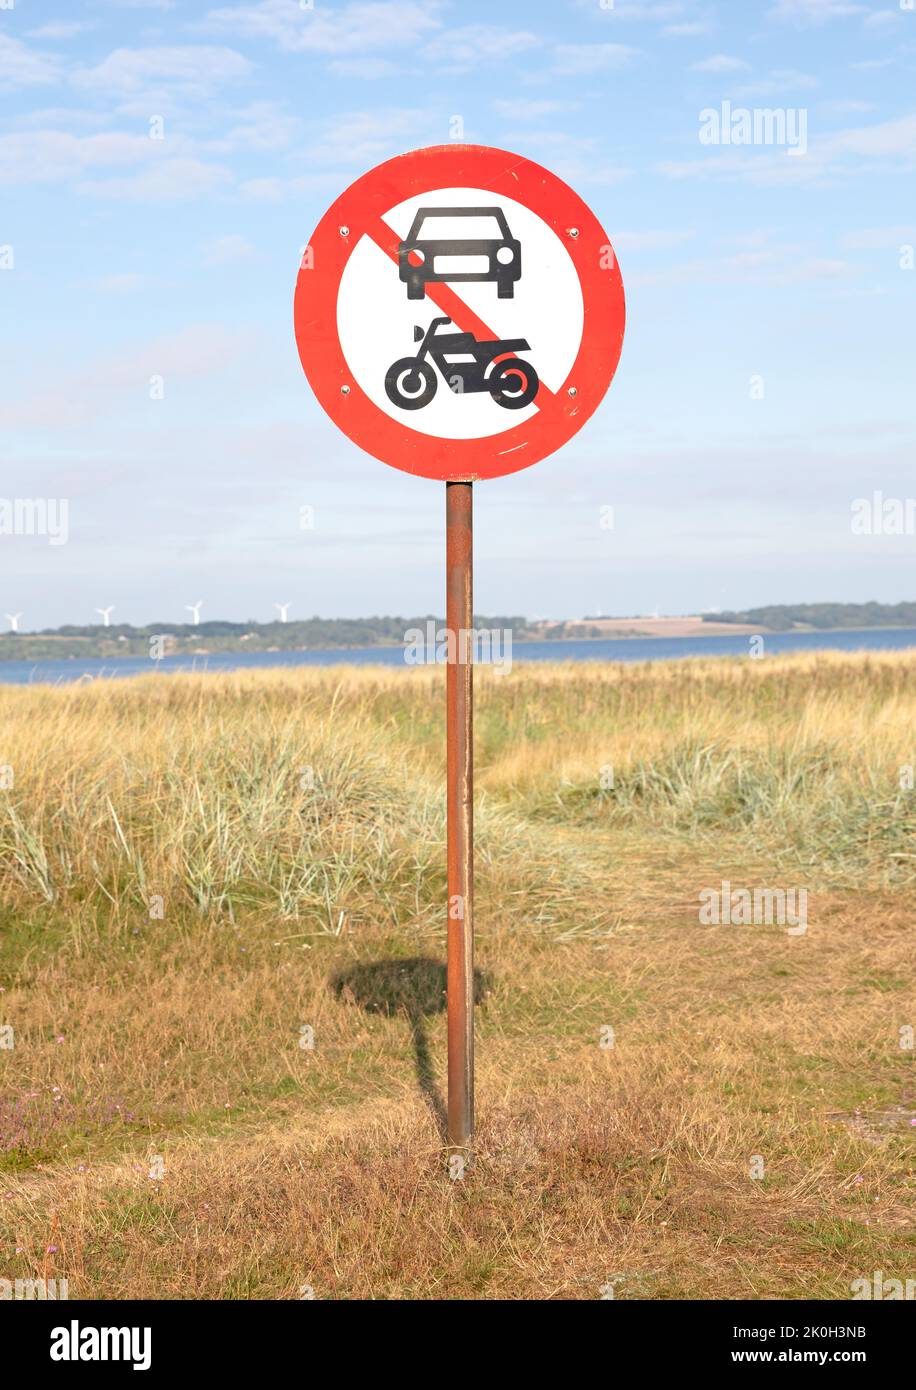 Prohibited Car and Motorcycle, round red symbol traffic sign, dunes in Denmark Stock Photo